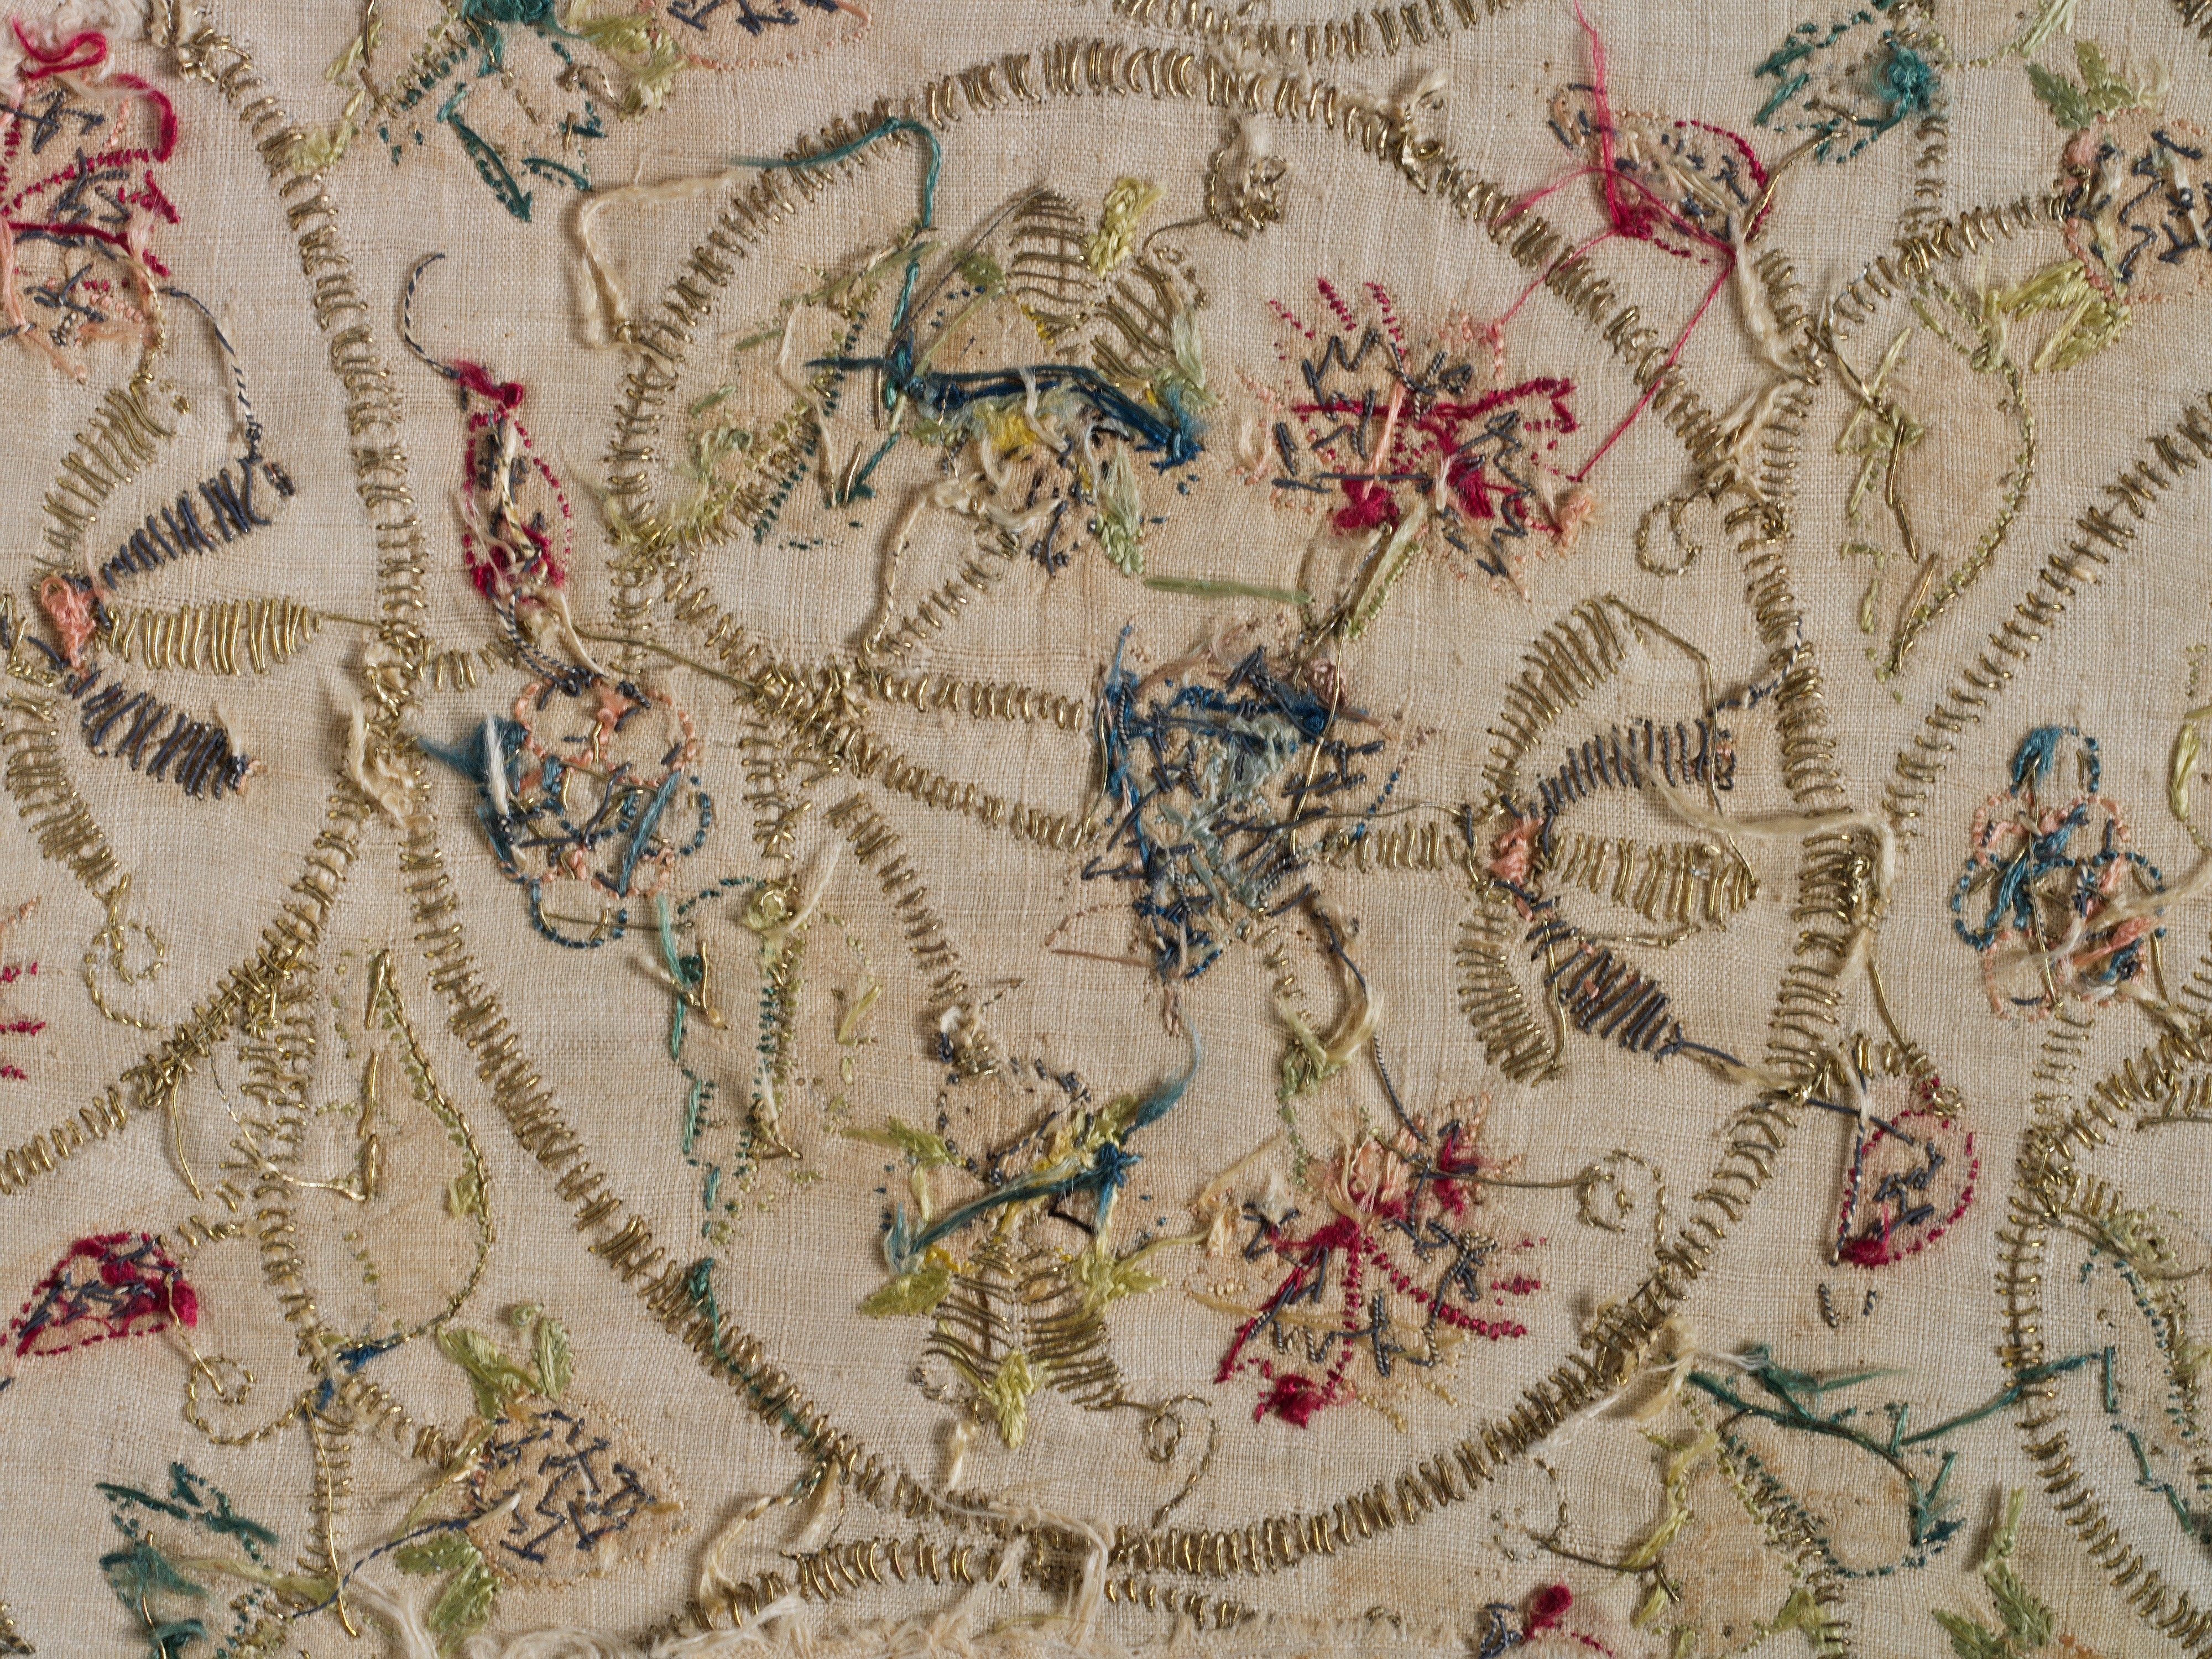 Embroidered picture, Medium: silk, metal wire, metal-wrapped silk, and  silk-wrapped metal embroidery on linen foundation Technique: embroidered in  running and interlaced l - Album alb5175666